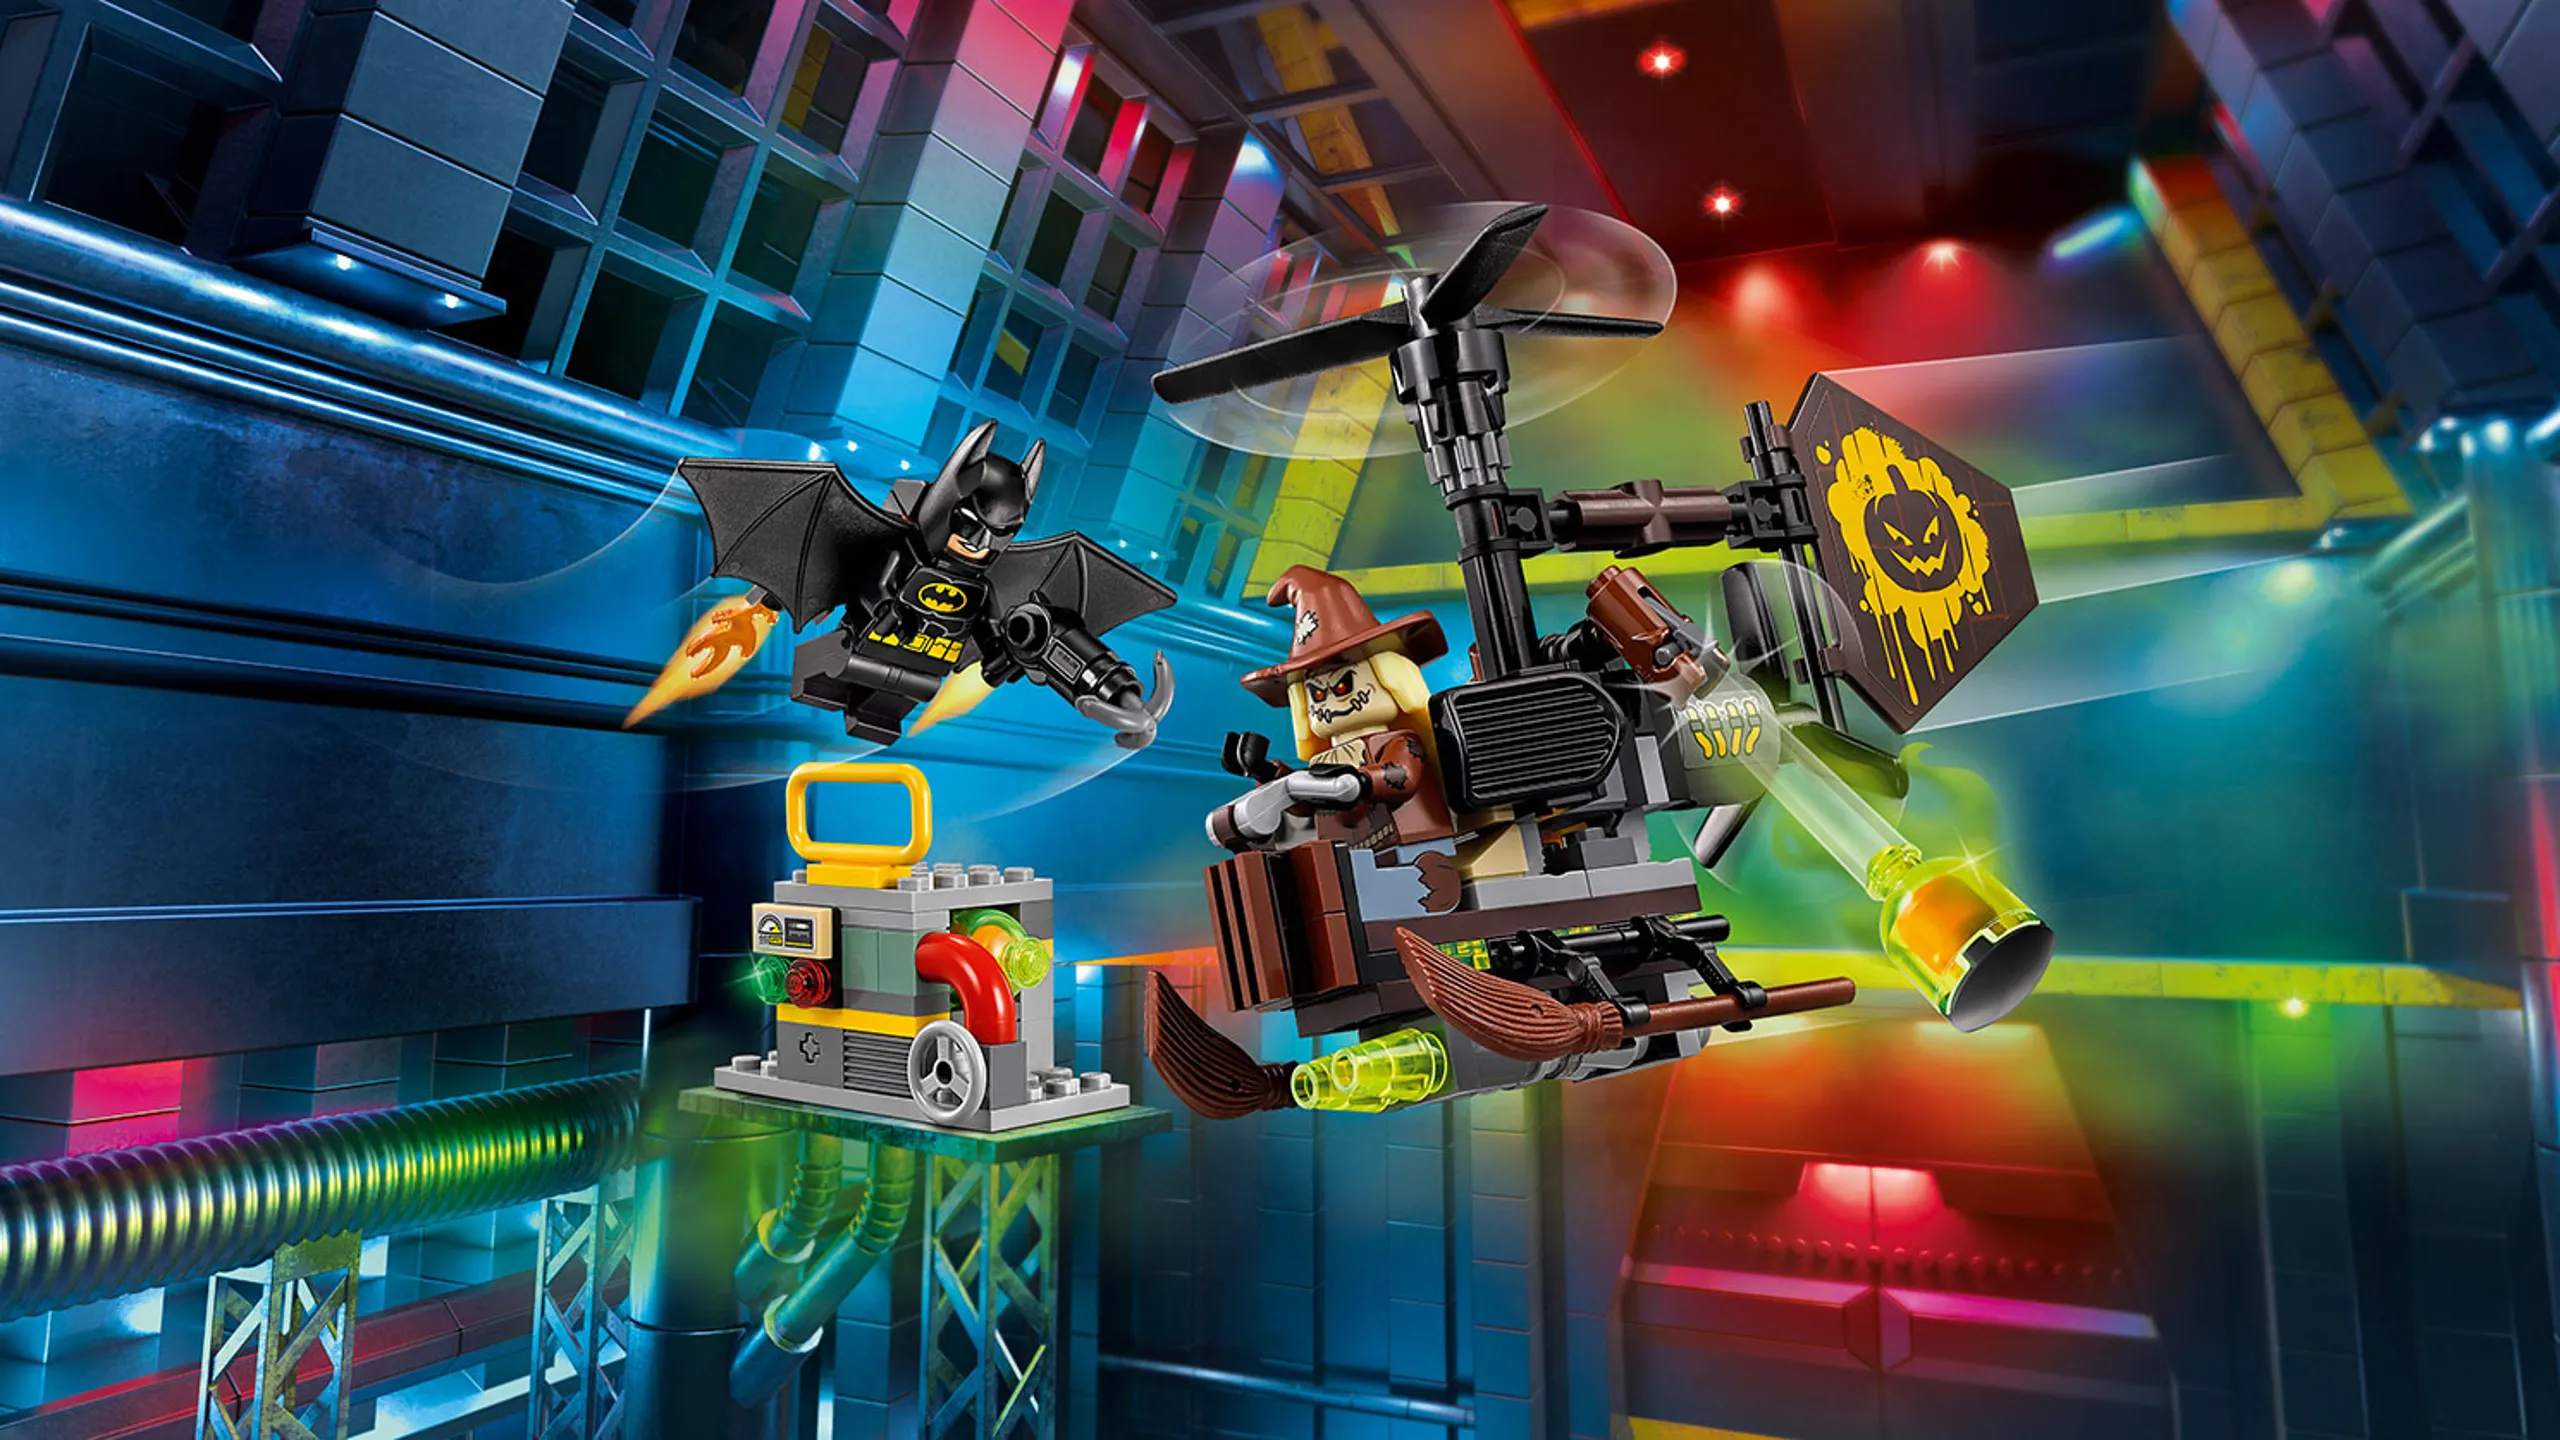 LEGO Batman Movie Scarecrow Fearful Face-off - 70913 - Scarecrow drops fear gas on the power plant from his Gyro-Copter and Batman must stop him.